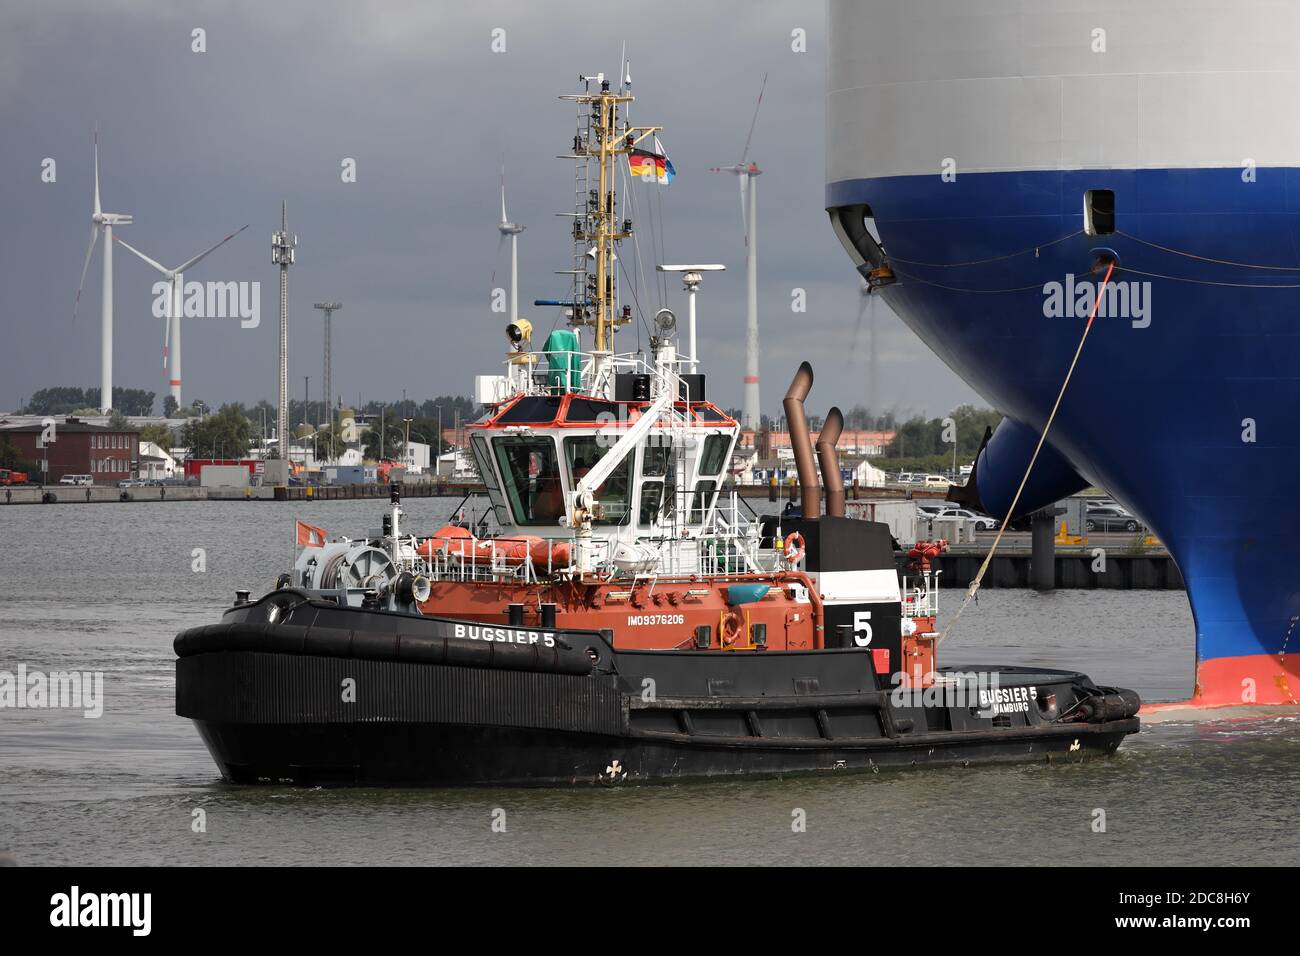 The port tug Bugsier 5 will be working in the port of Bremerhaven on August 24, 2020. Stock Photo